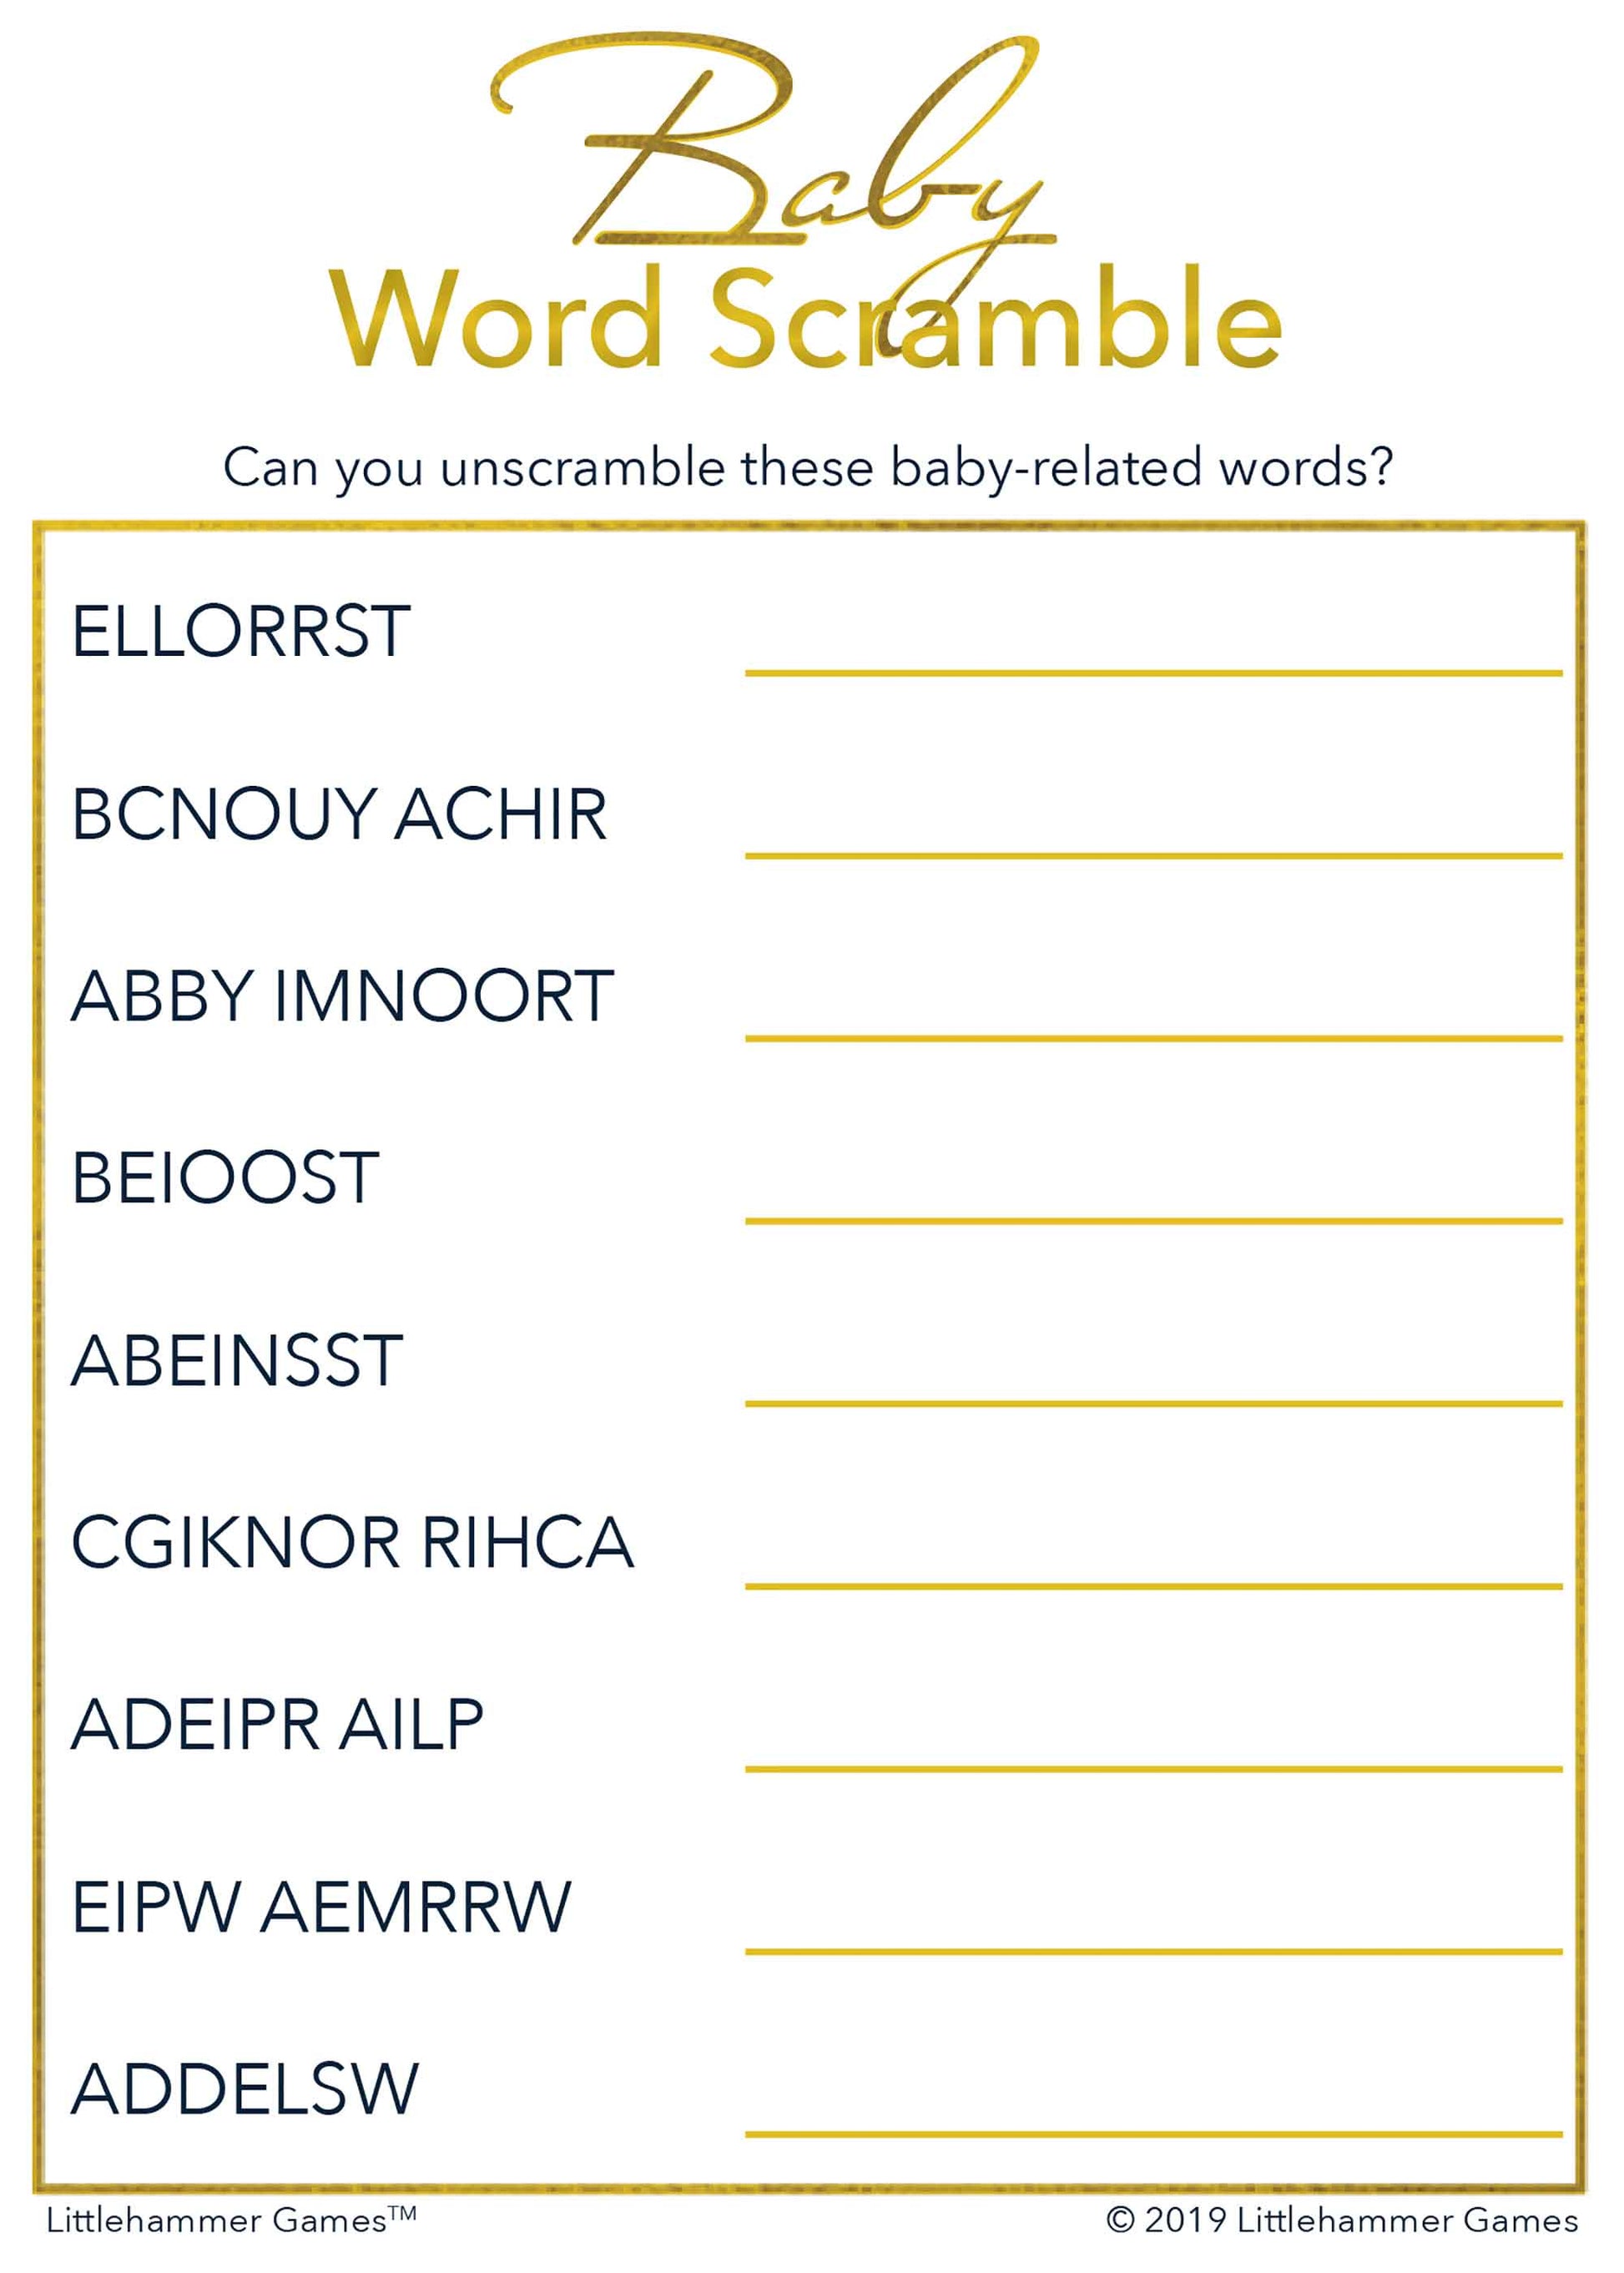 Baby Word Scramble game card with gold text on a white background